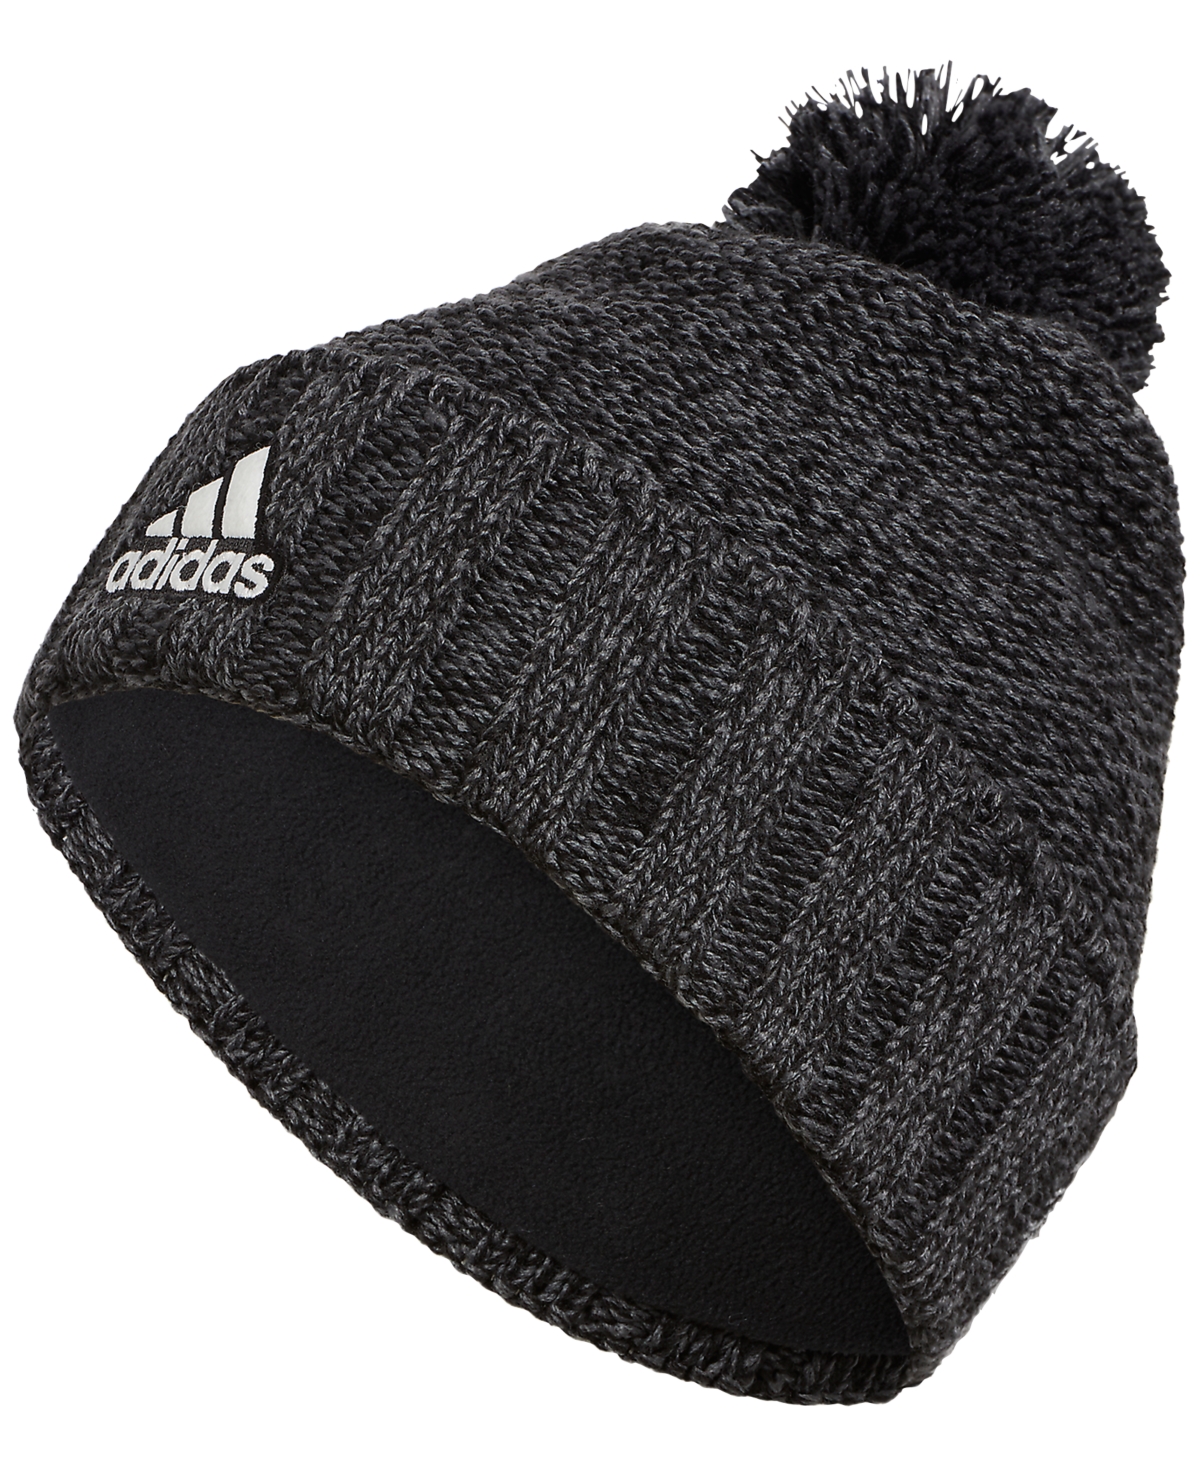 Adidas Originals Men's Tall Fit Recon Ballie 3 Knit Hat In Charcoal